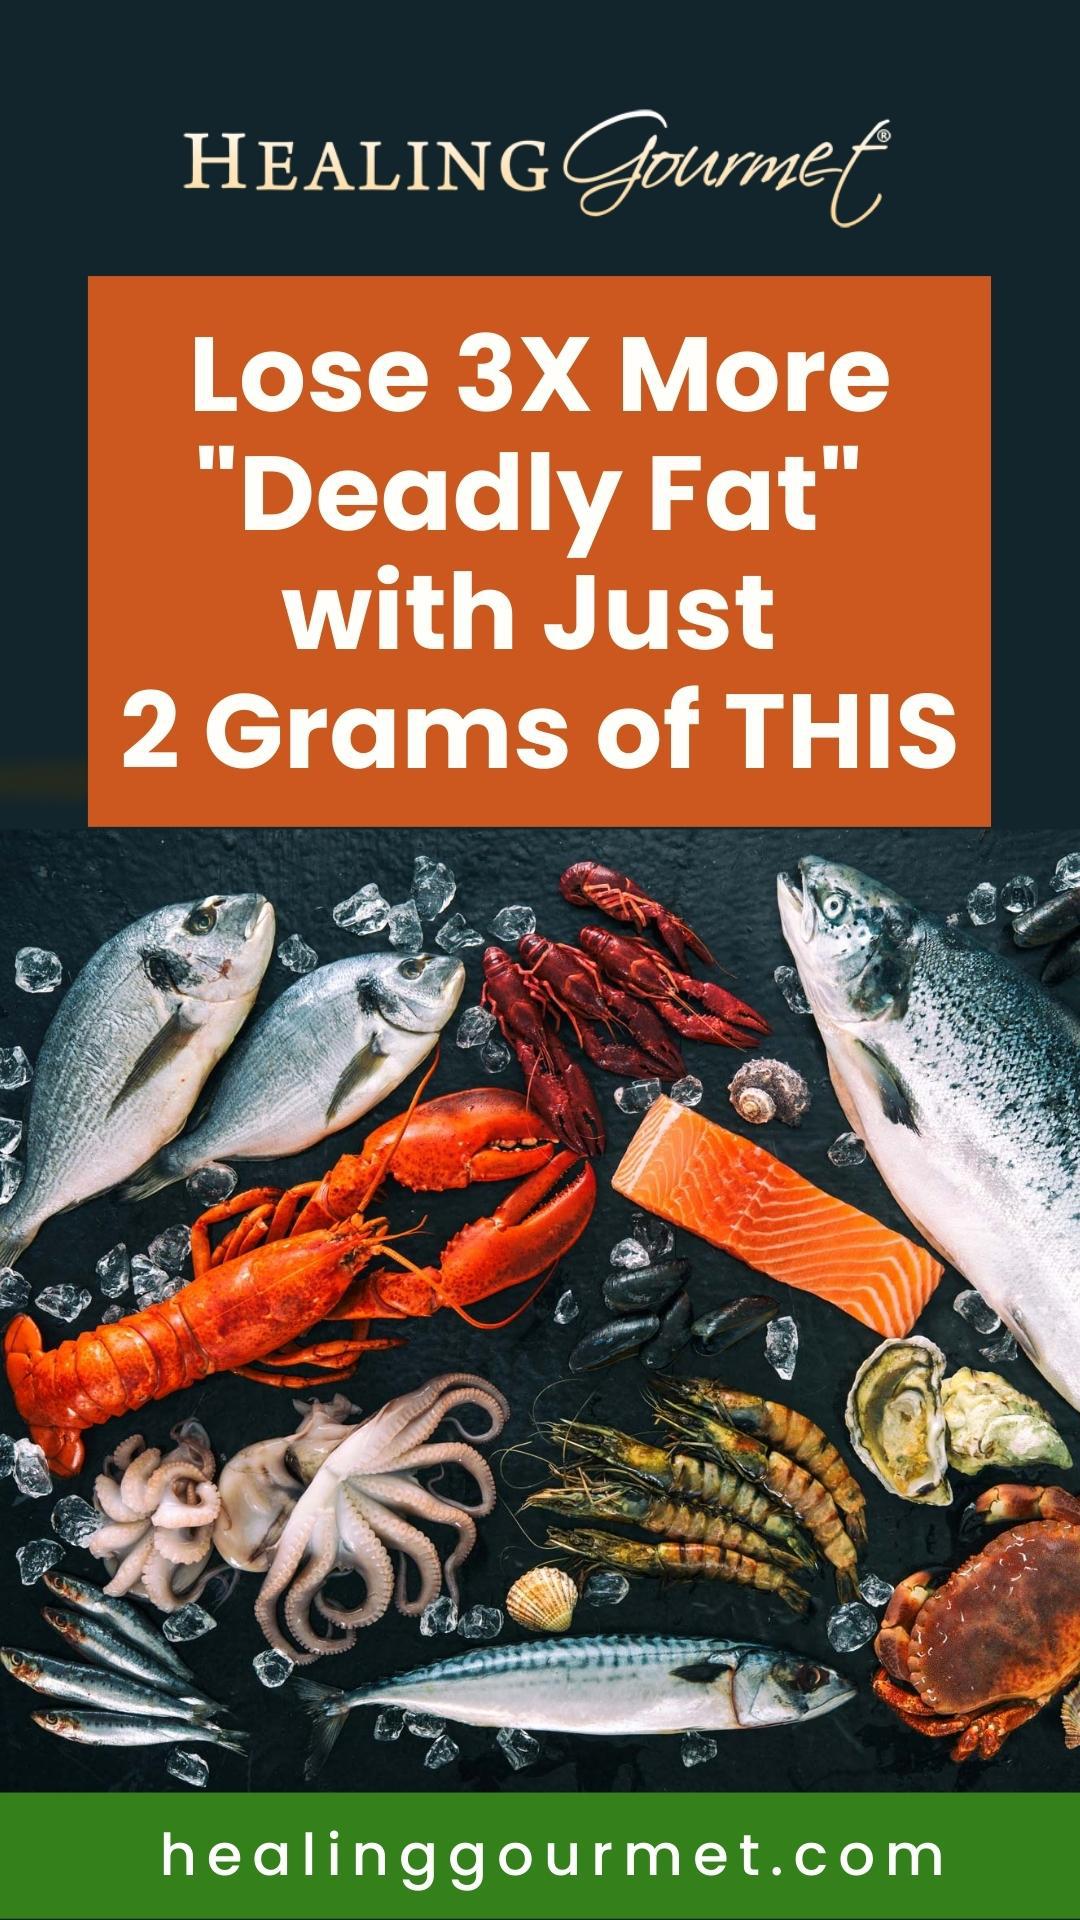 Omega 3 Fats Slash Your Risk of Heart Attack Risk by 35%